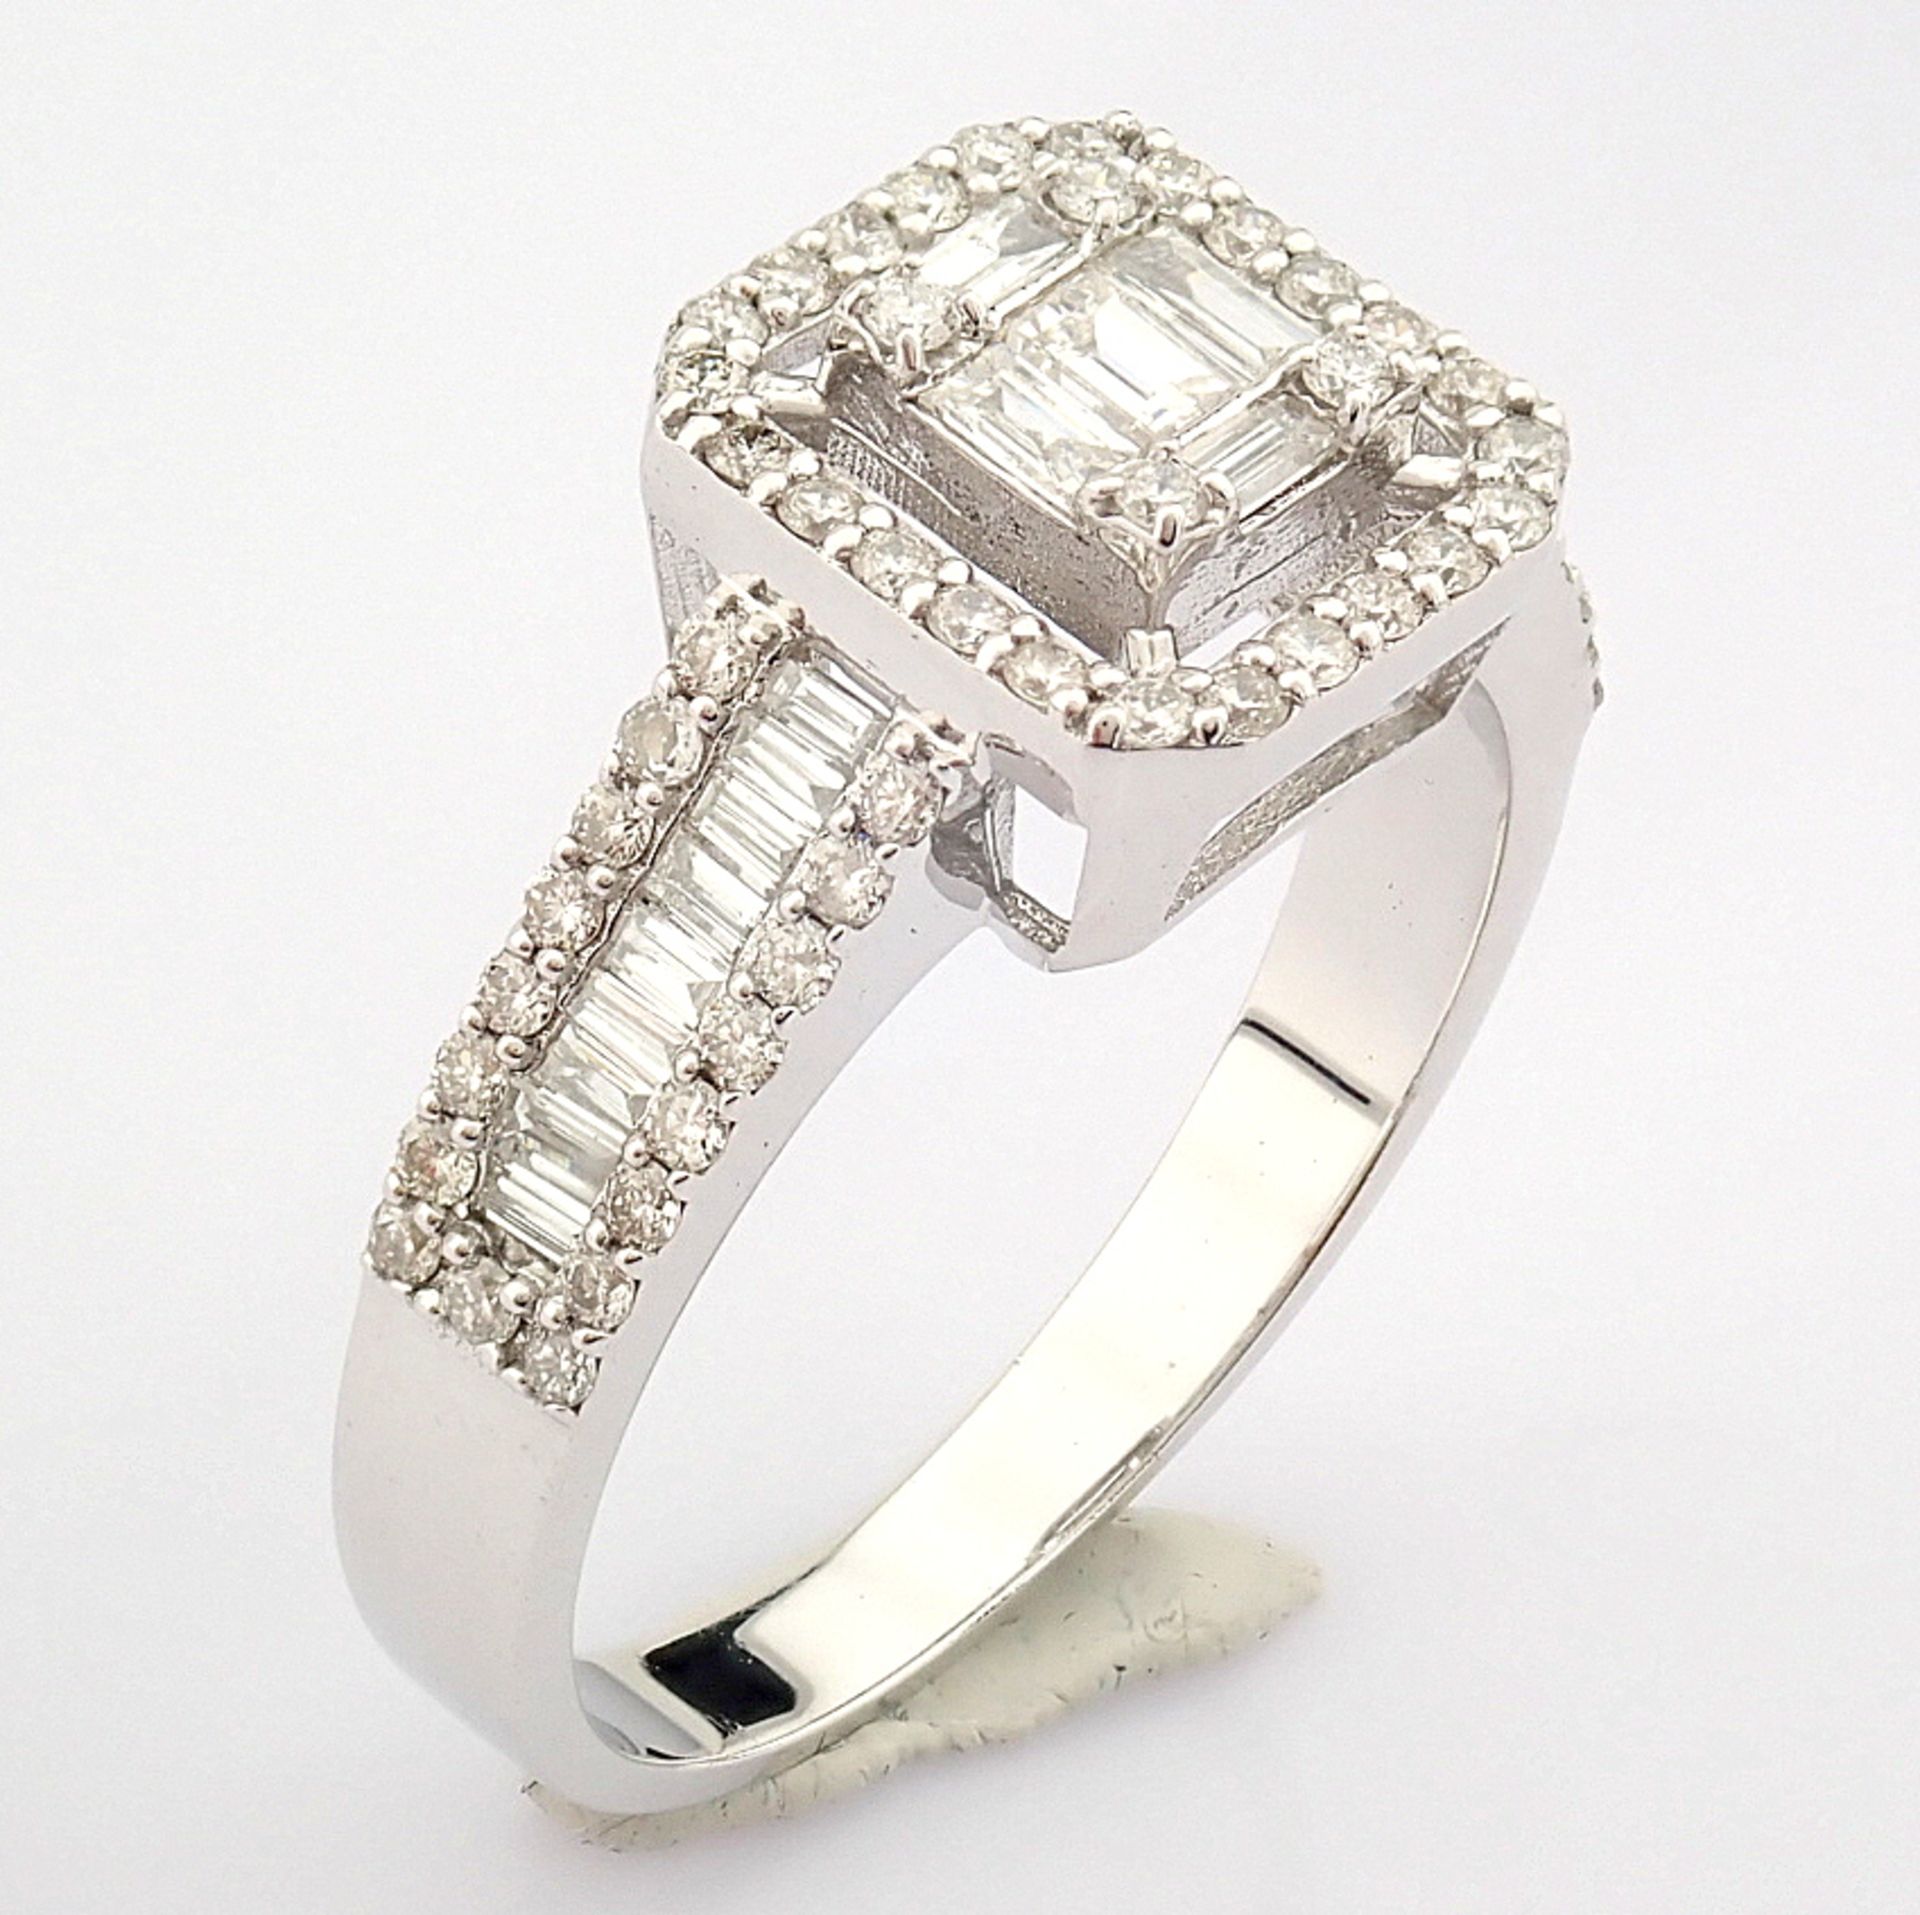 Certificated 14K White Gold Baguette Diamond & Diamond Ring (Total 0.59 ct Stone) - Image 3 of 8